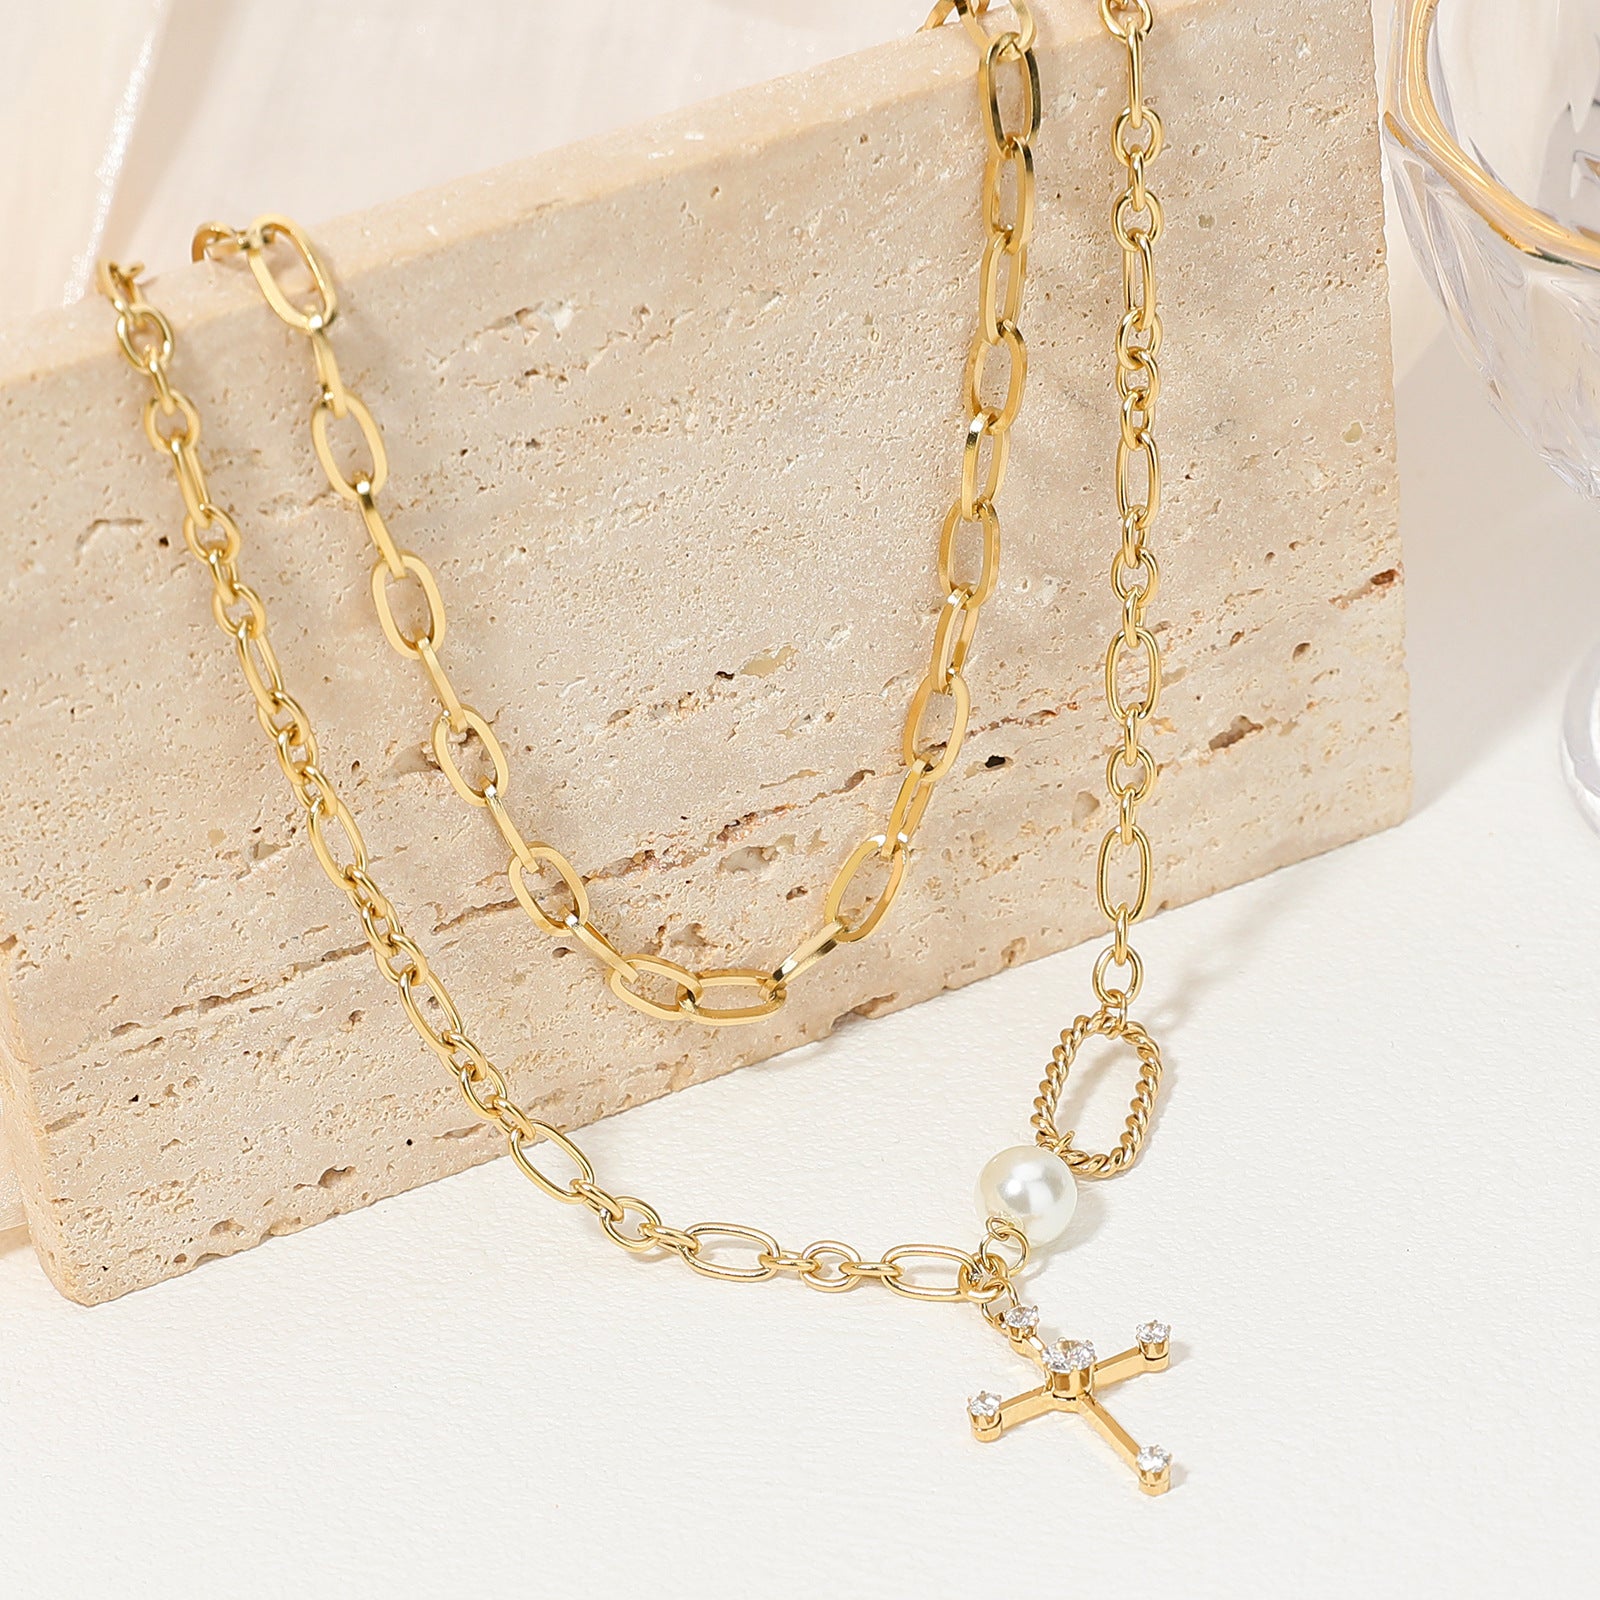 2-Layer Pearl Cross Pendant Long Necklace | Sweet Cool LOVE Bracelet in Trendy Chic Style  UponBasics   